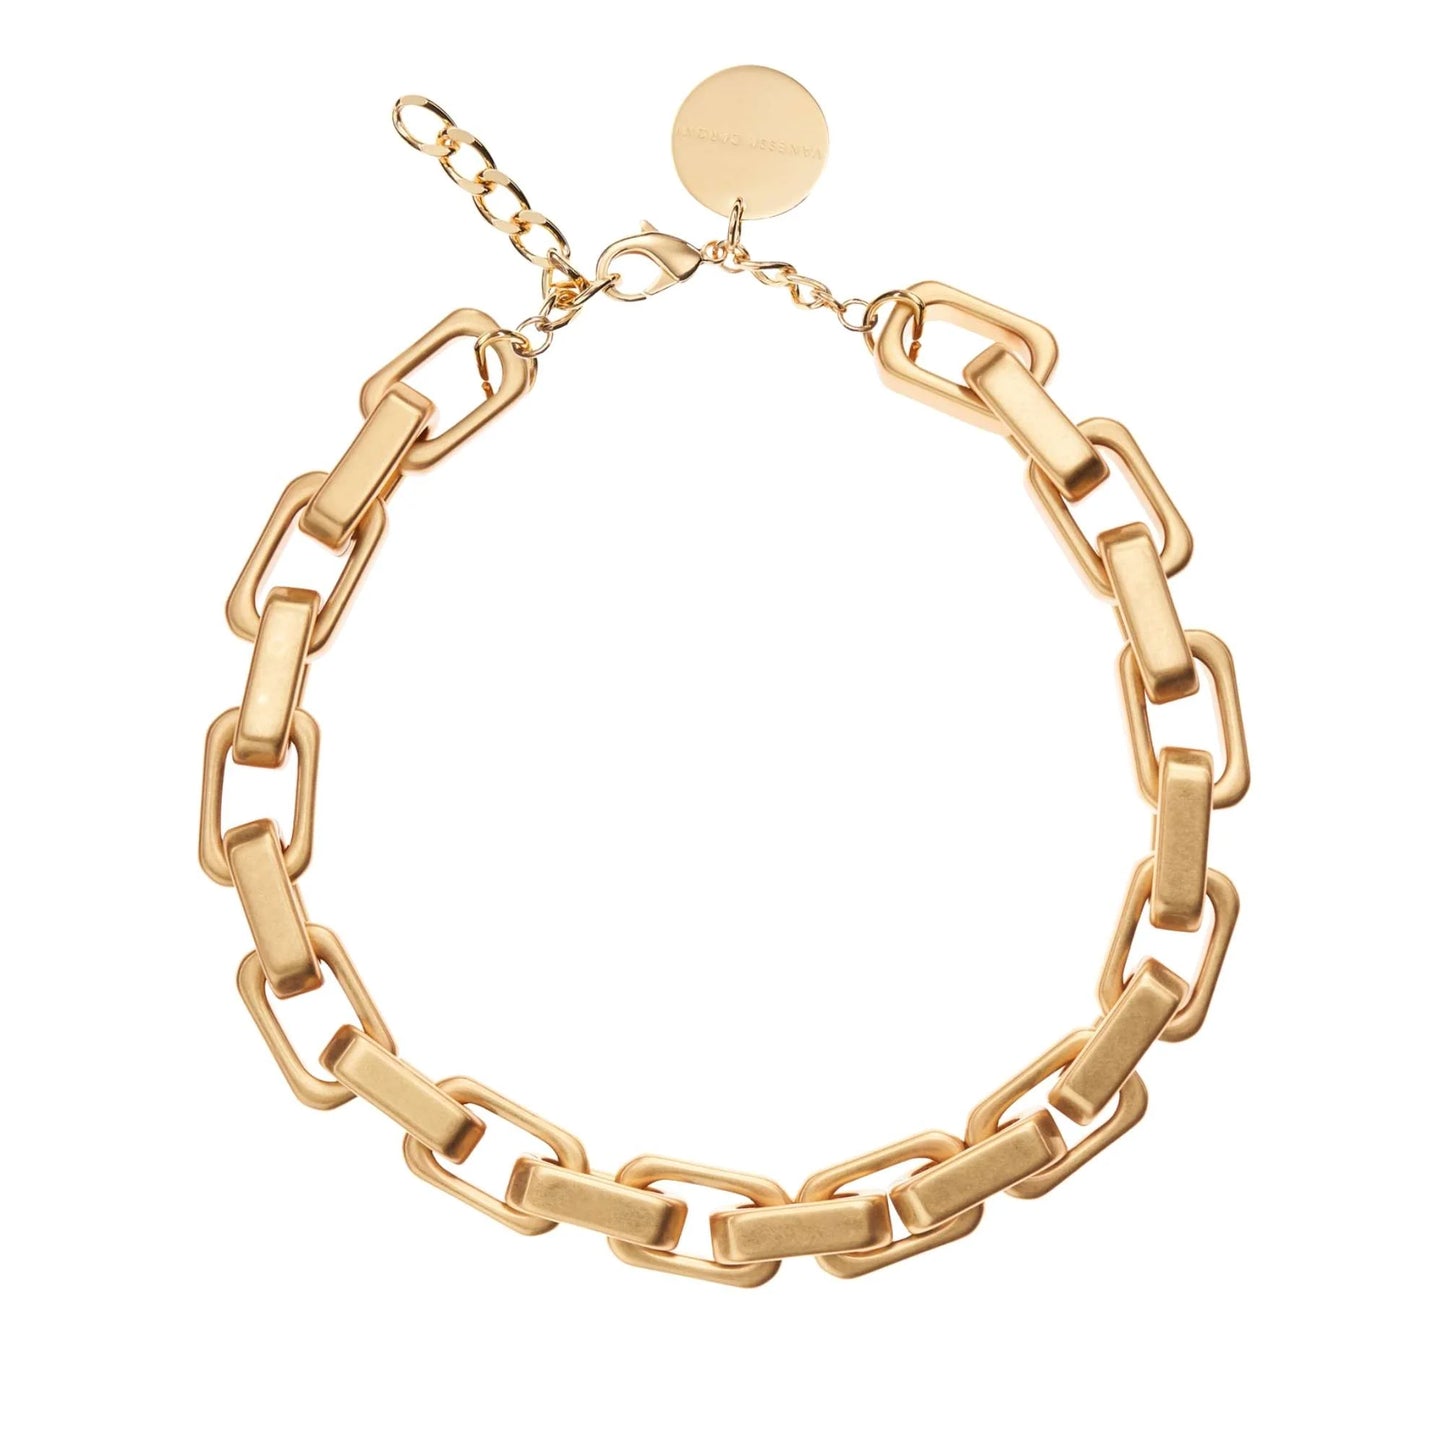 Big Flat Chain Necklace - Vintage Gold by Vanessa Baroni